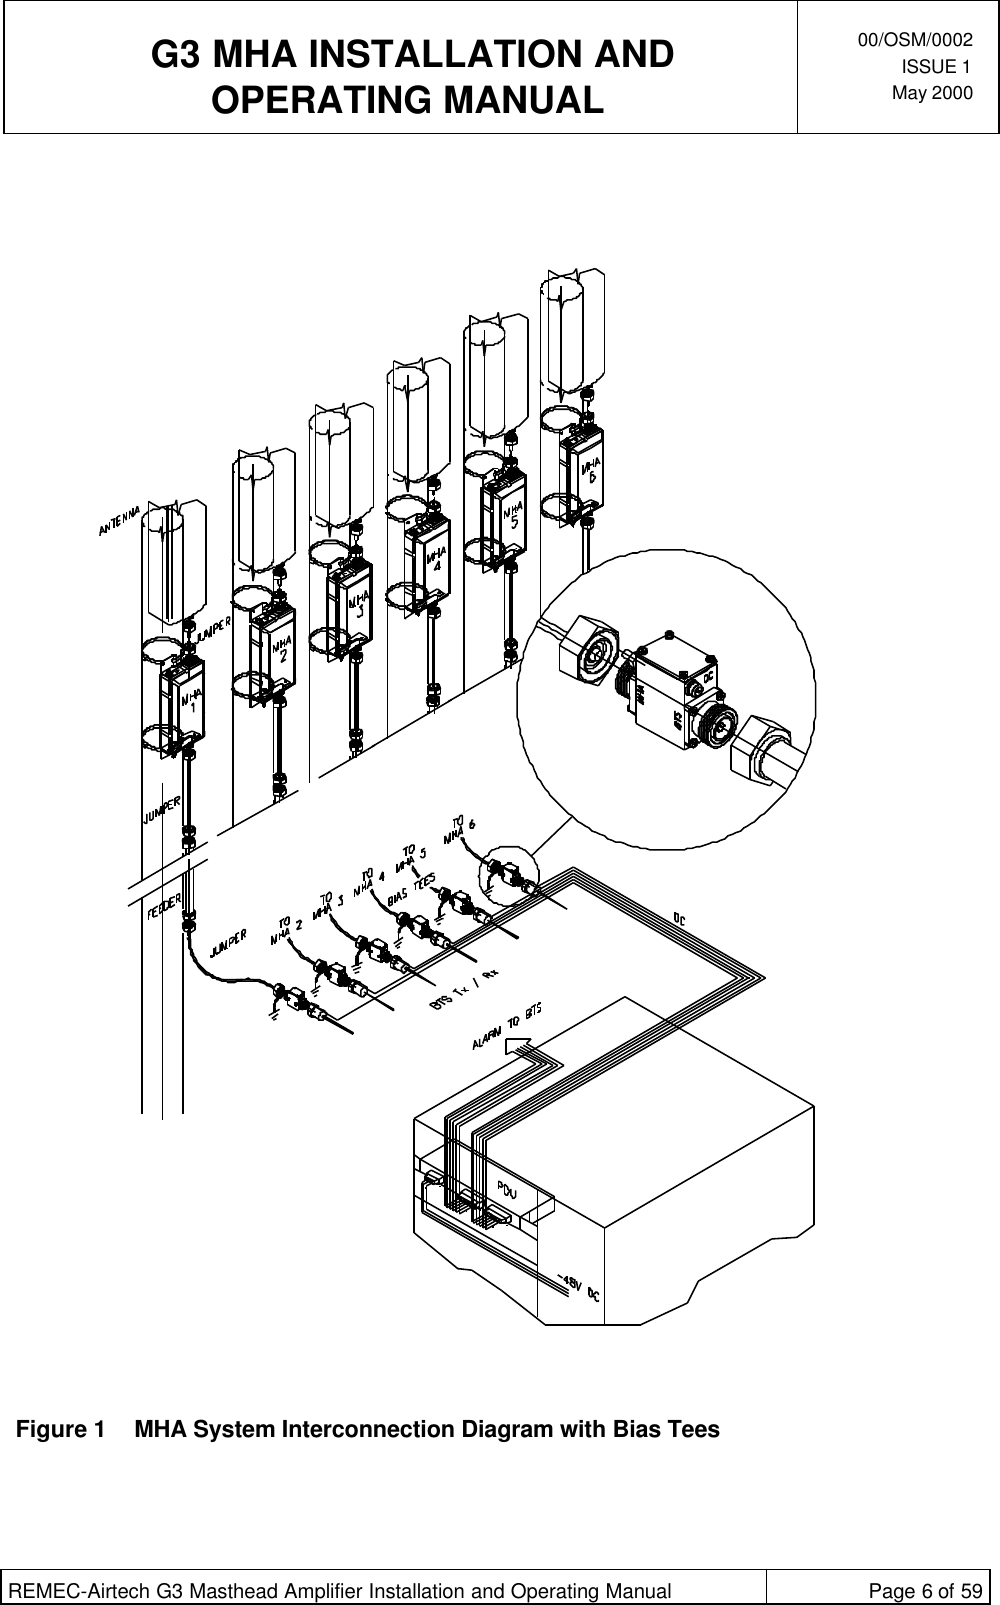  G3 MHA INSTALLATION ANDOPERATING MANUAL00/OSM/0002ISSUE 1May 2000REMEC-Airtech G3 Masthead Amplifier Installation and Operating Manual Page 6 of 59Figure 1 MHA System Interconnection Diagram with Bias Tees